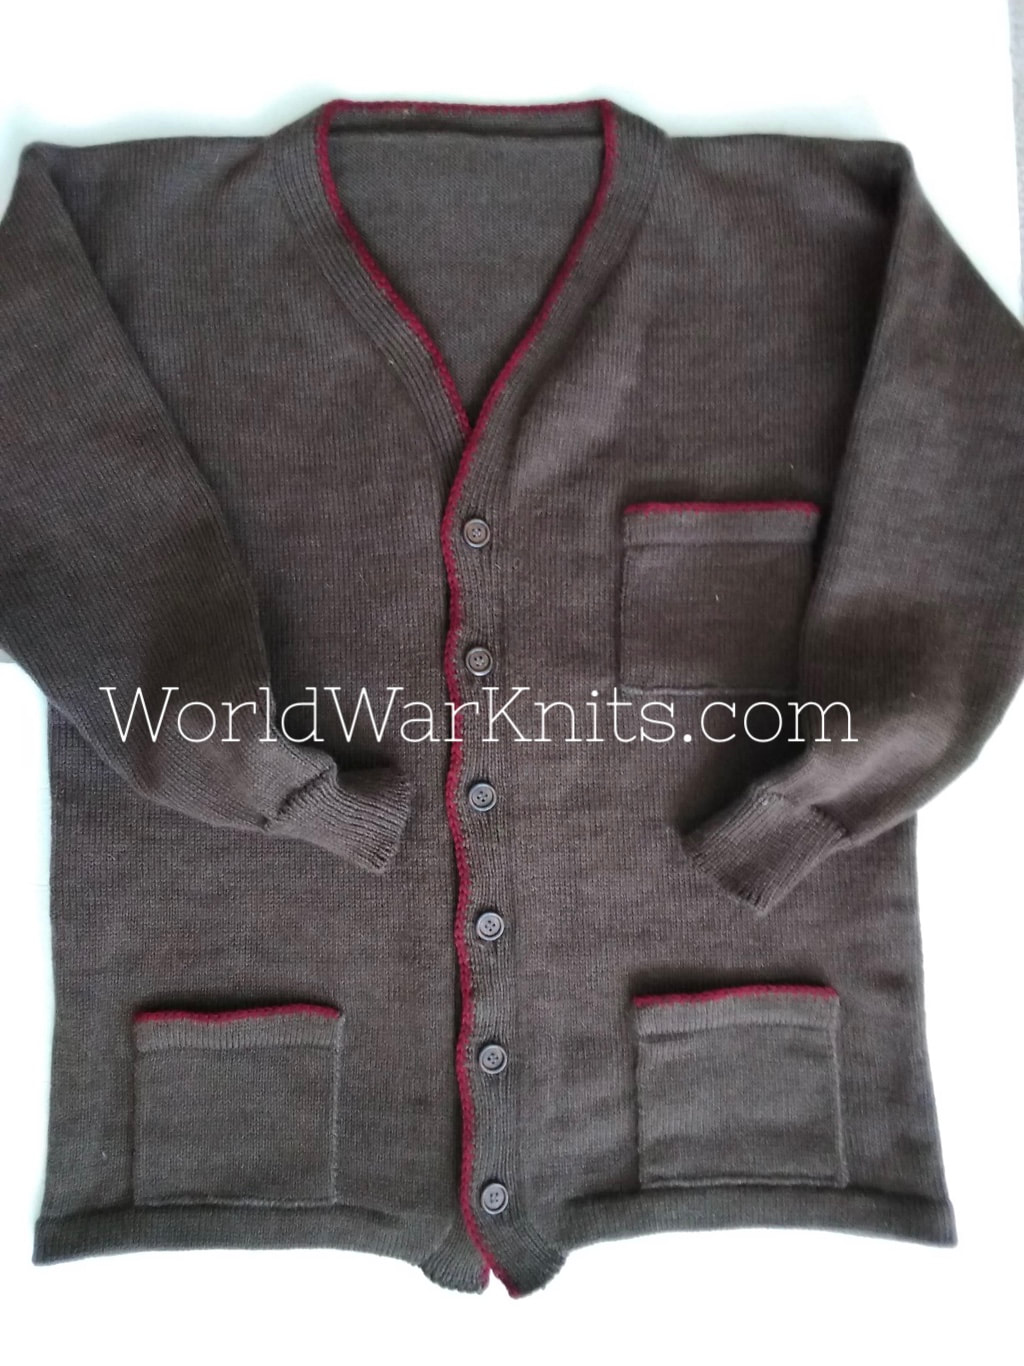 Civil War era cardigan sweater. A knitted reproduction. 